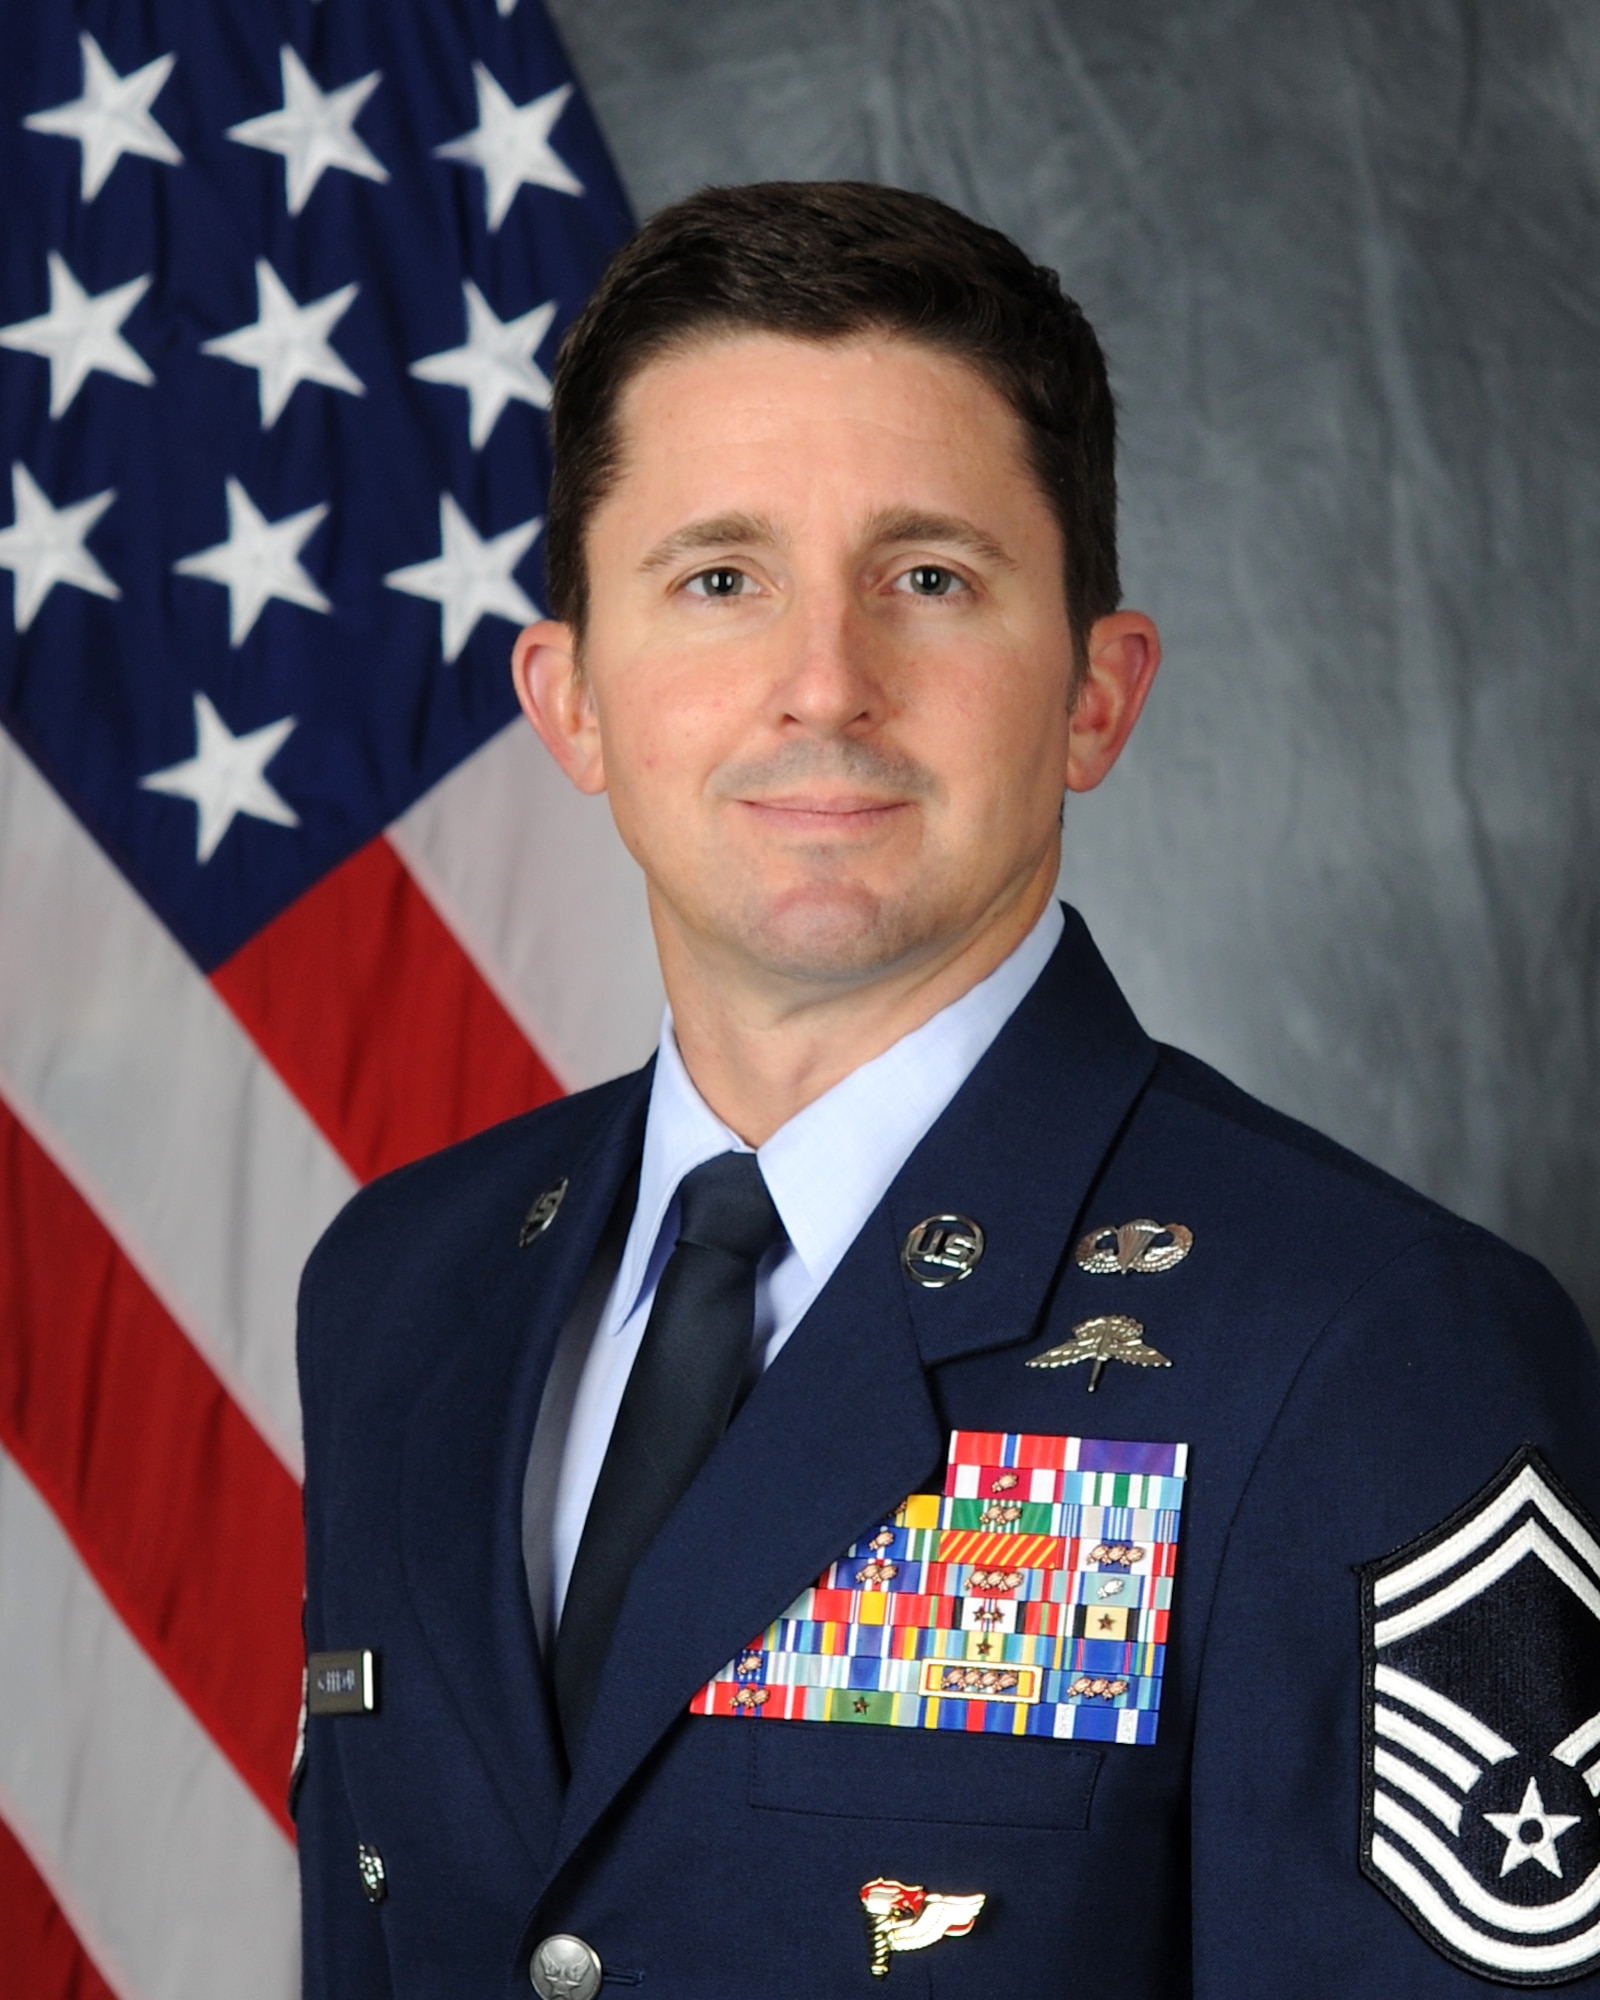 U.S. Air Force Senior Master Sgt. Benjamin Garrison, U.S. Air Forces Europe – Air Forces Africa Tactical Air Control Party functional manager, was selected as one of the Ten Outstanding Young Americans for 2017.